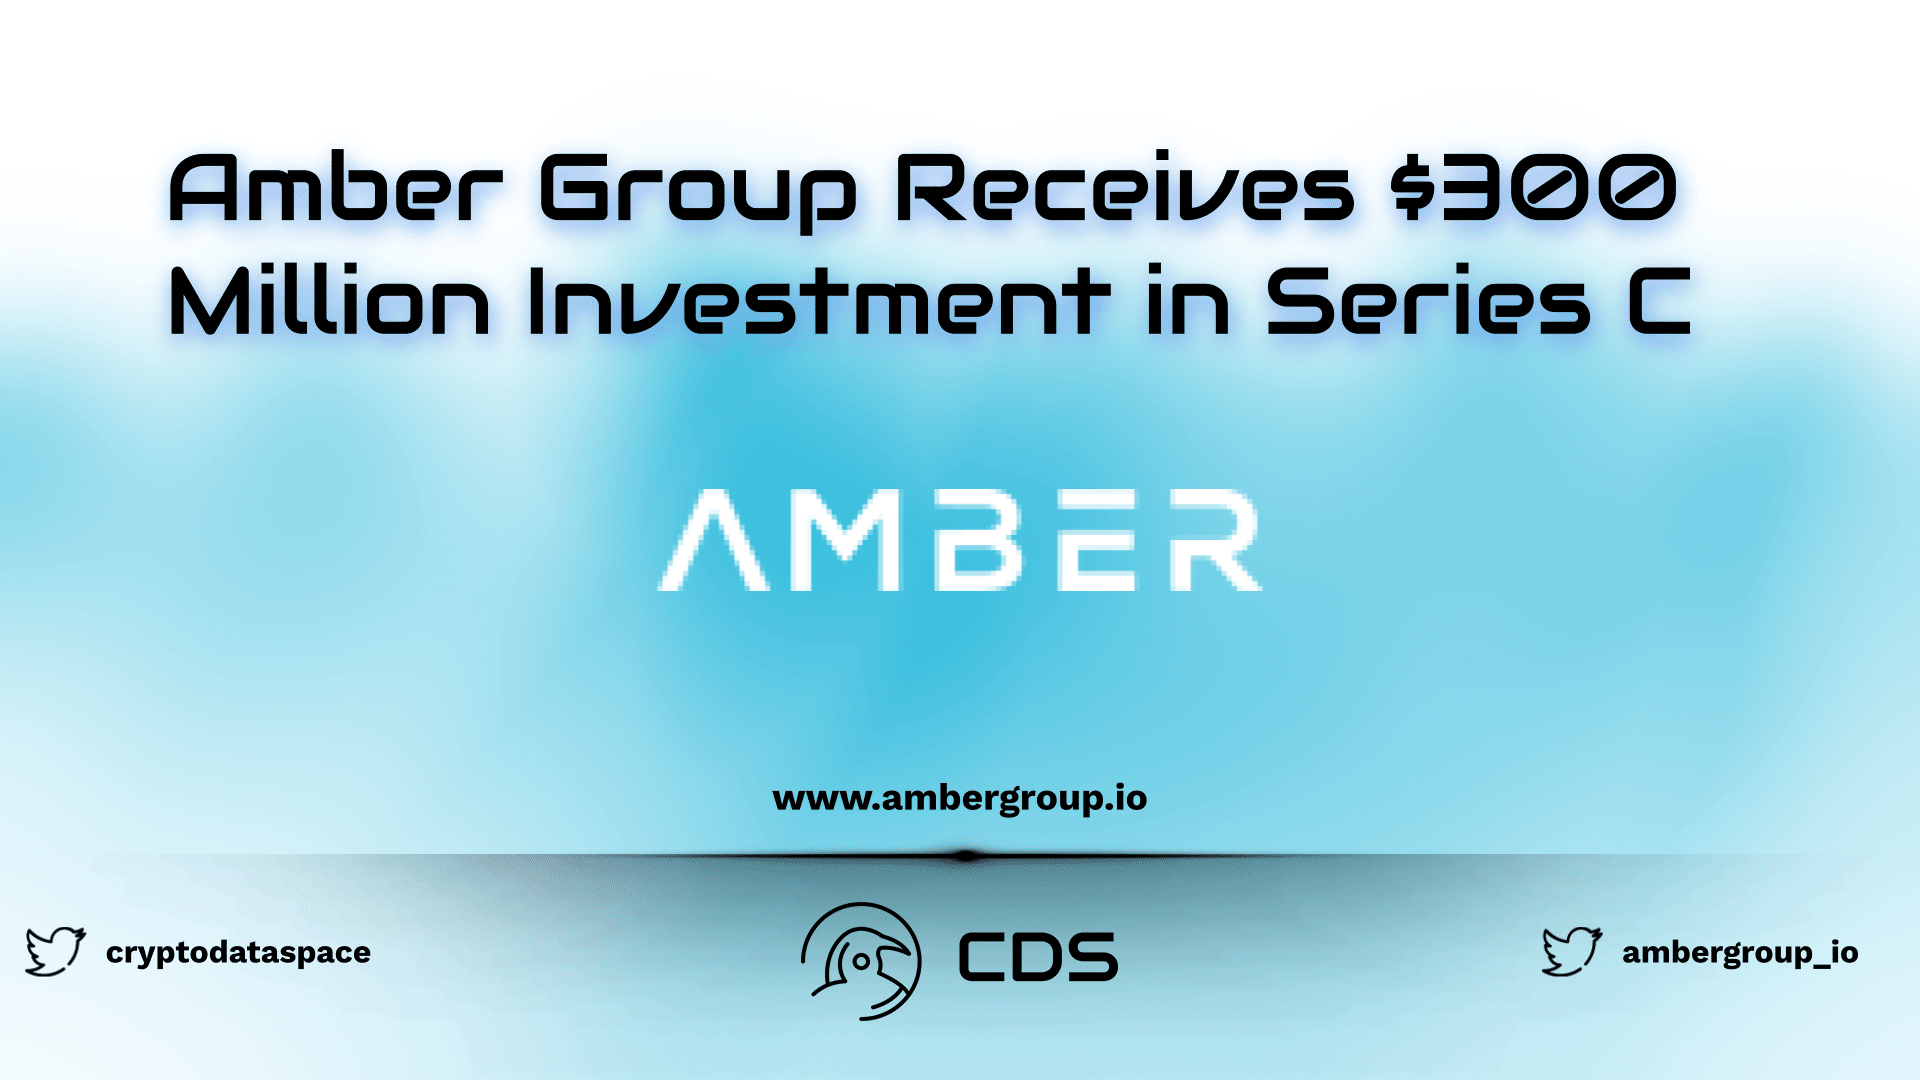 Amber Group Receives $300 Million Investment in Series C